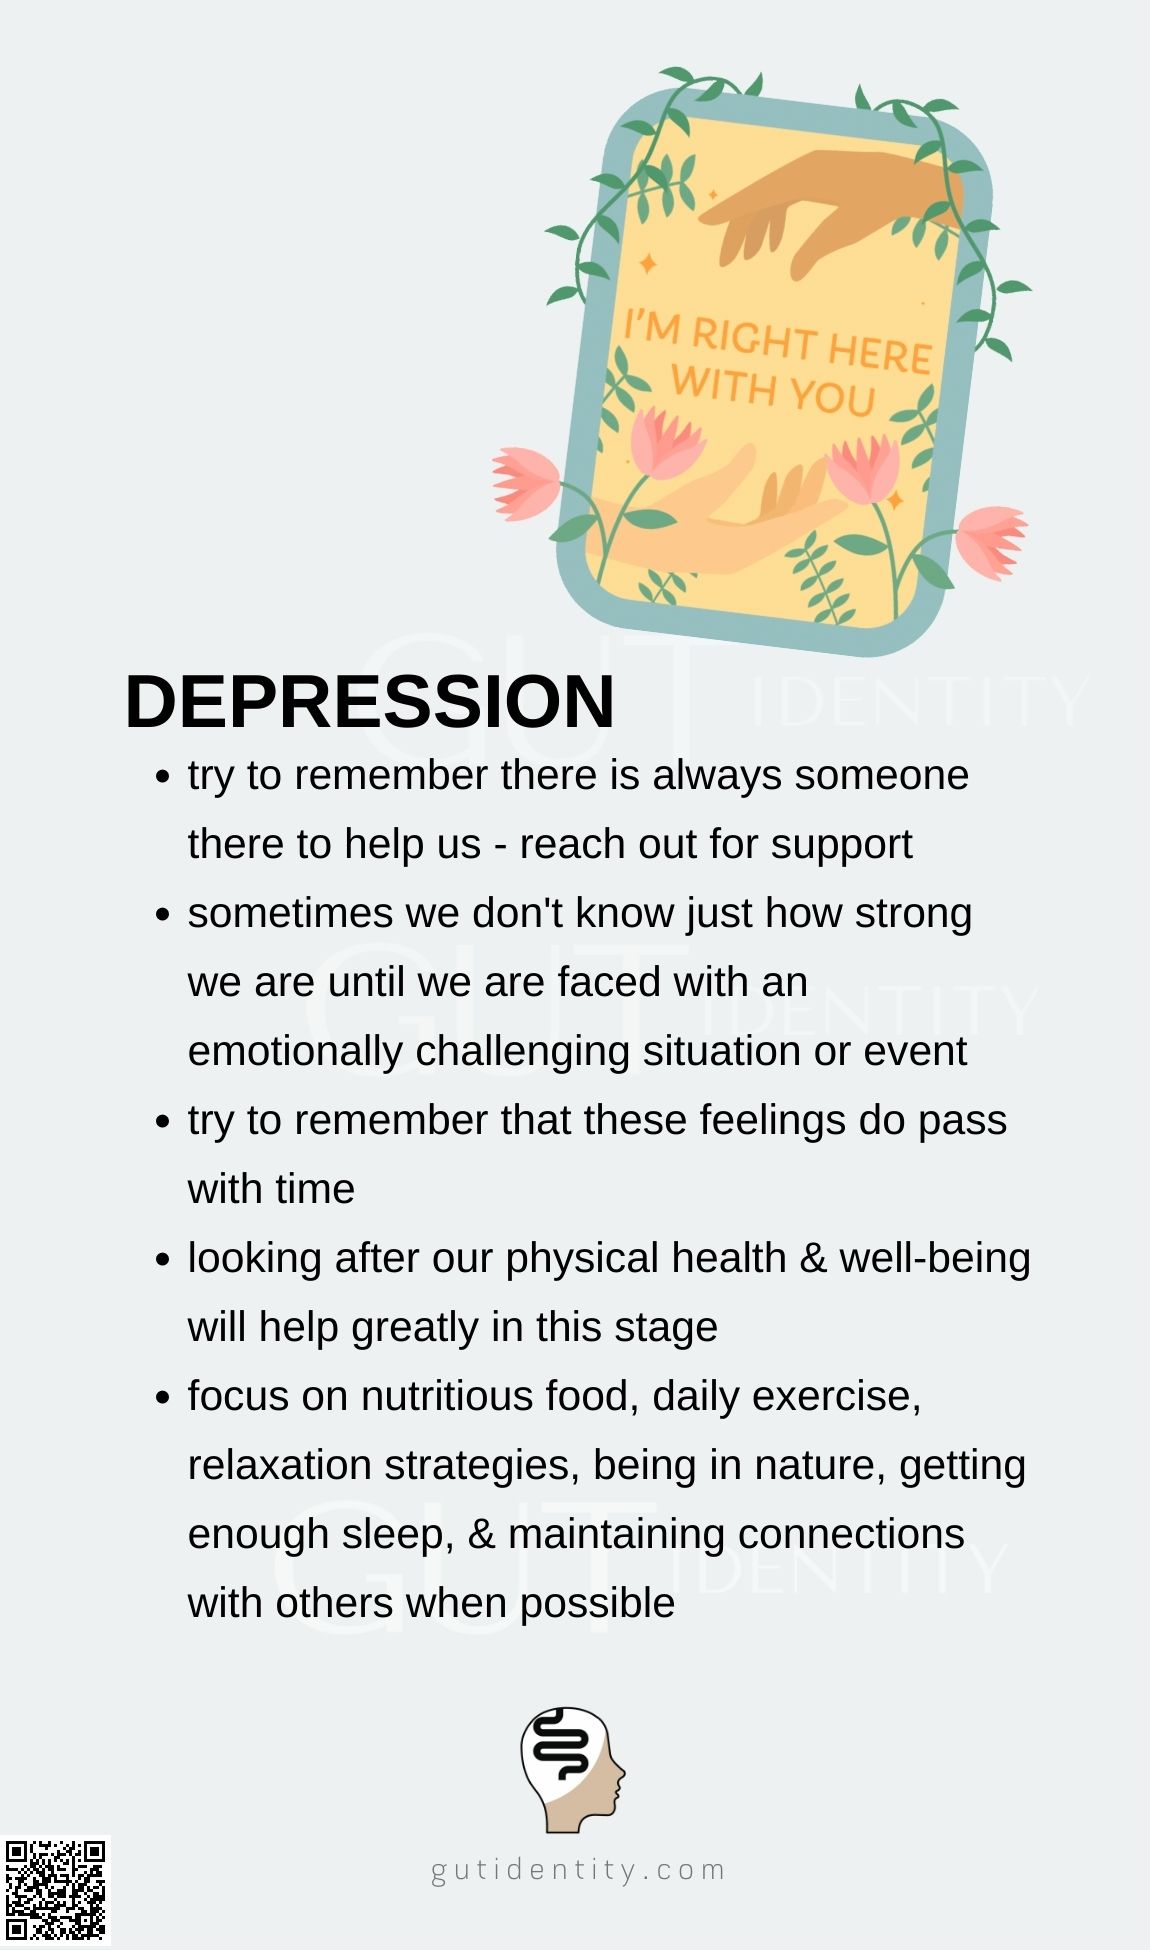 The depression stage in grief